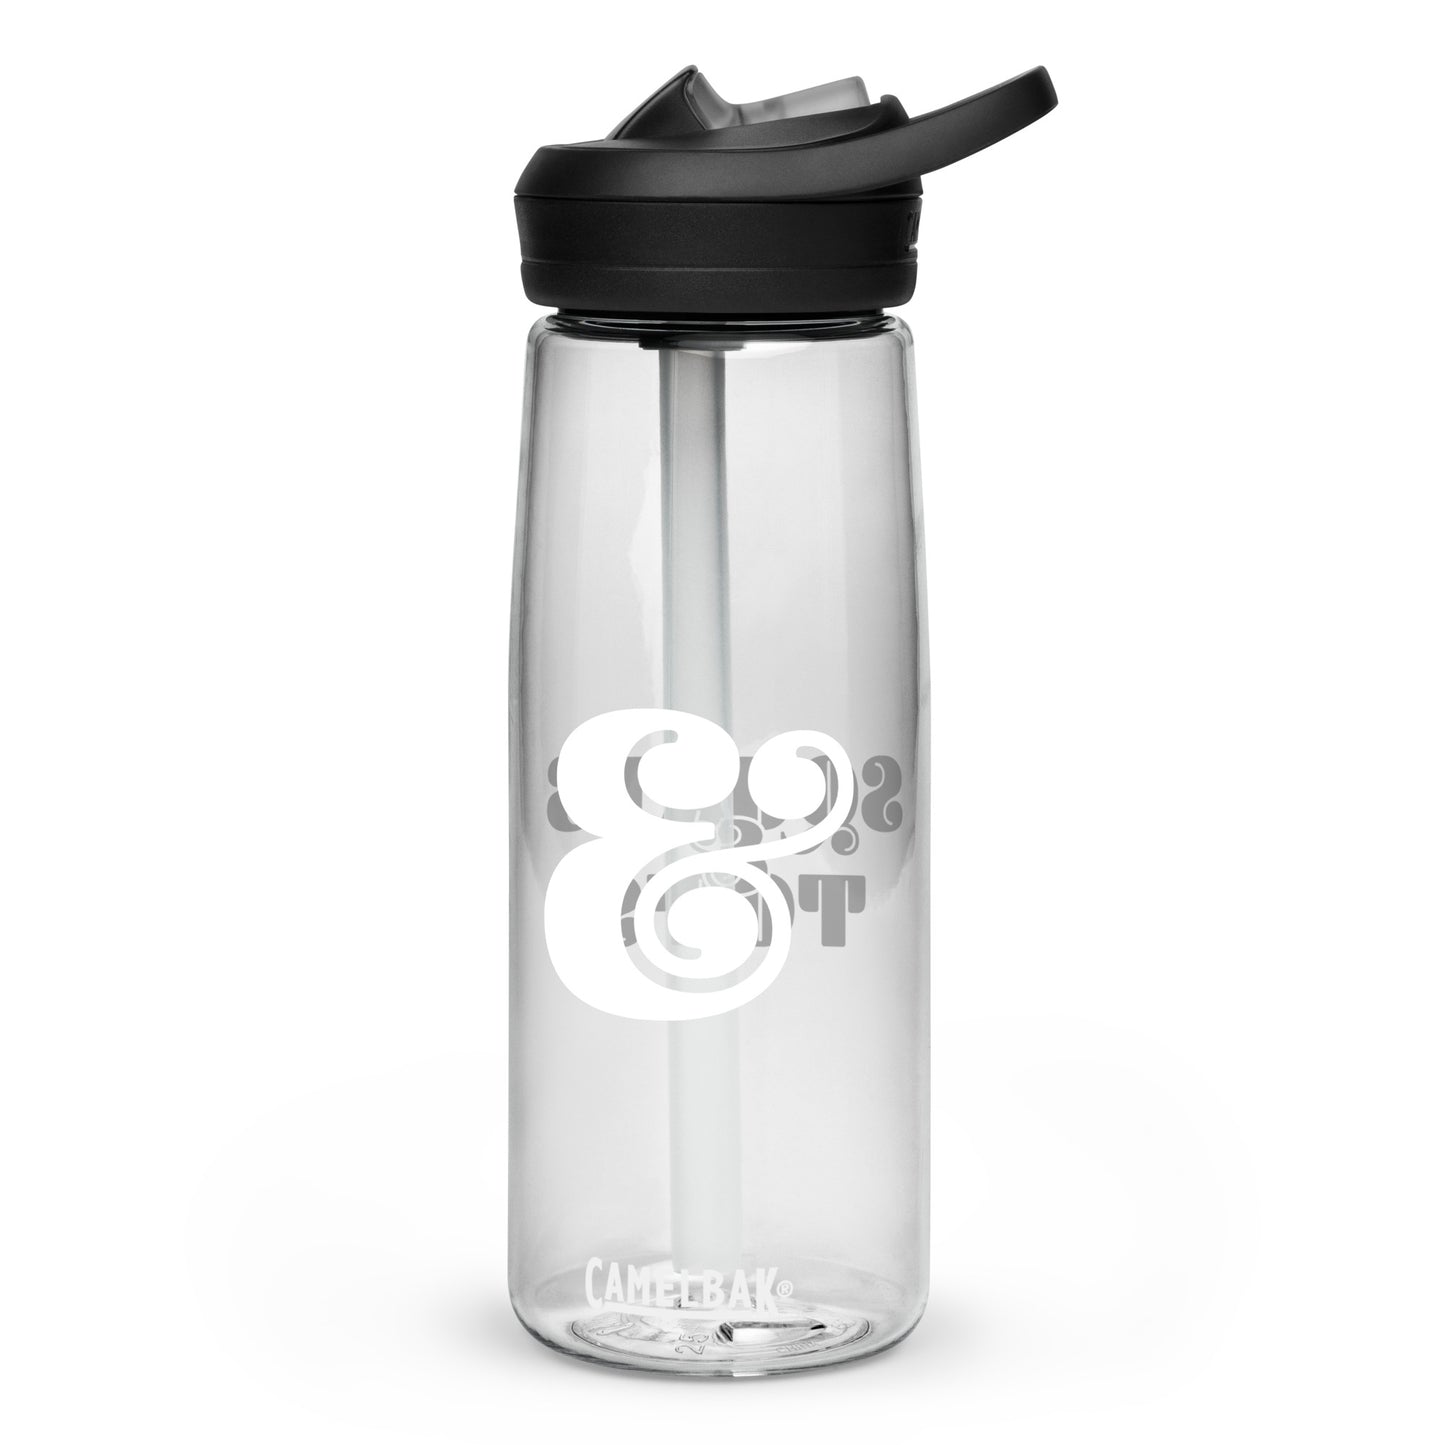 Squats and Tots Sports water bottle